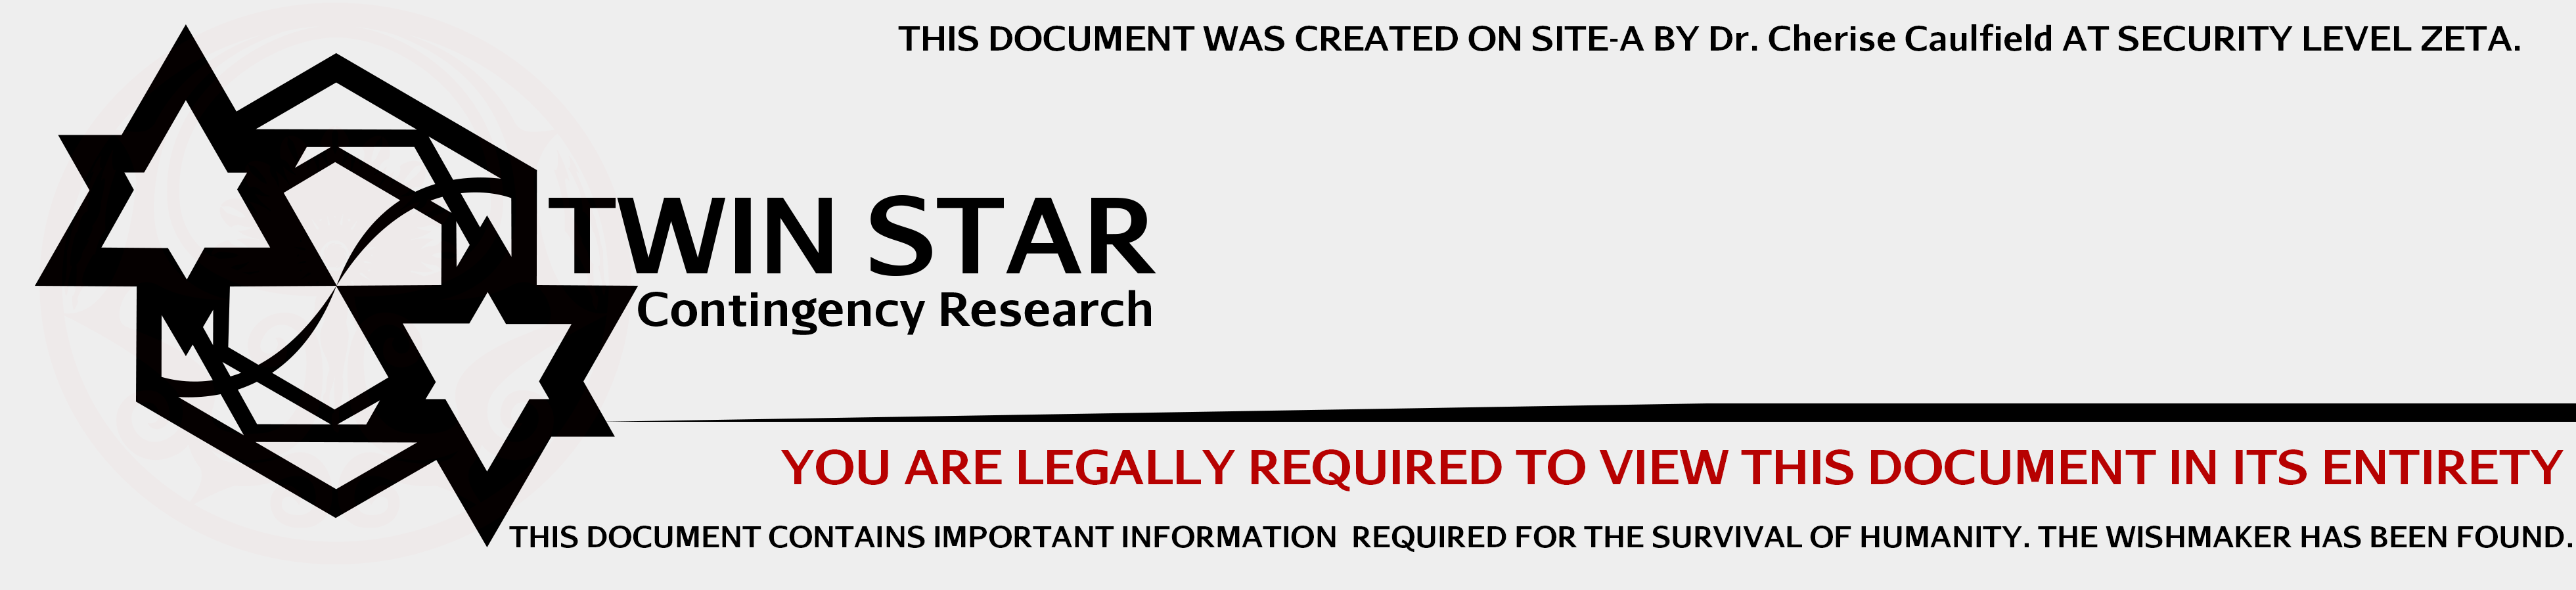 TWIN STAR CONTINGENCY RESEARCH. YOU ARE LEGALLY REQUIRED TO VIEW THIS DOCUMENT IN ITS ENTIRETY. THIS DOCUMENT CONTAINS IMPORTANT INFORMATION REQUIRED FOR THE SURVIVAL OF HUMANITY. THE WISHMAKER HAS BEEN FOUND.